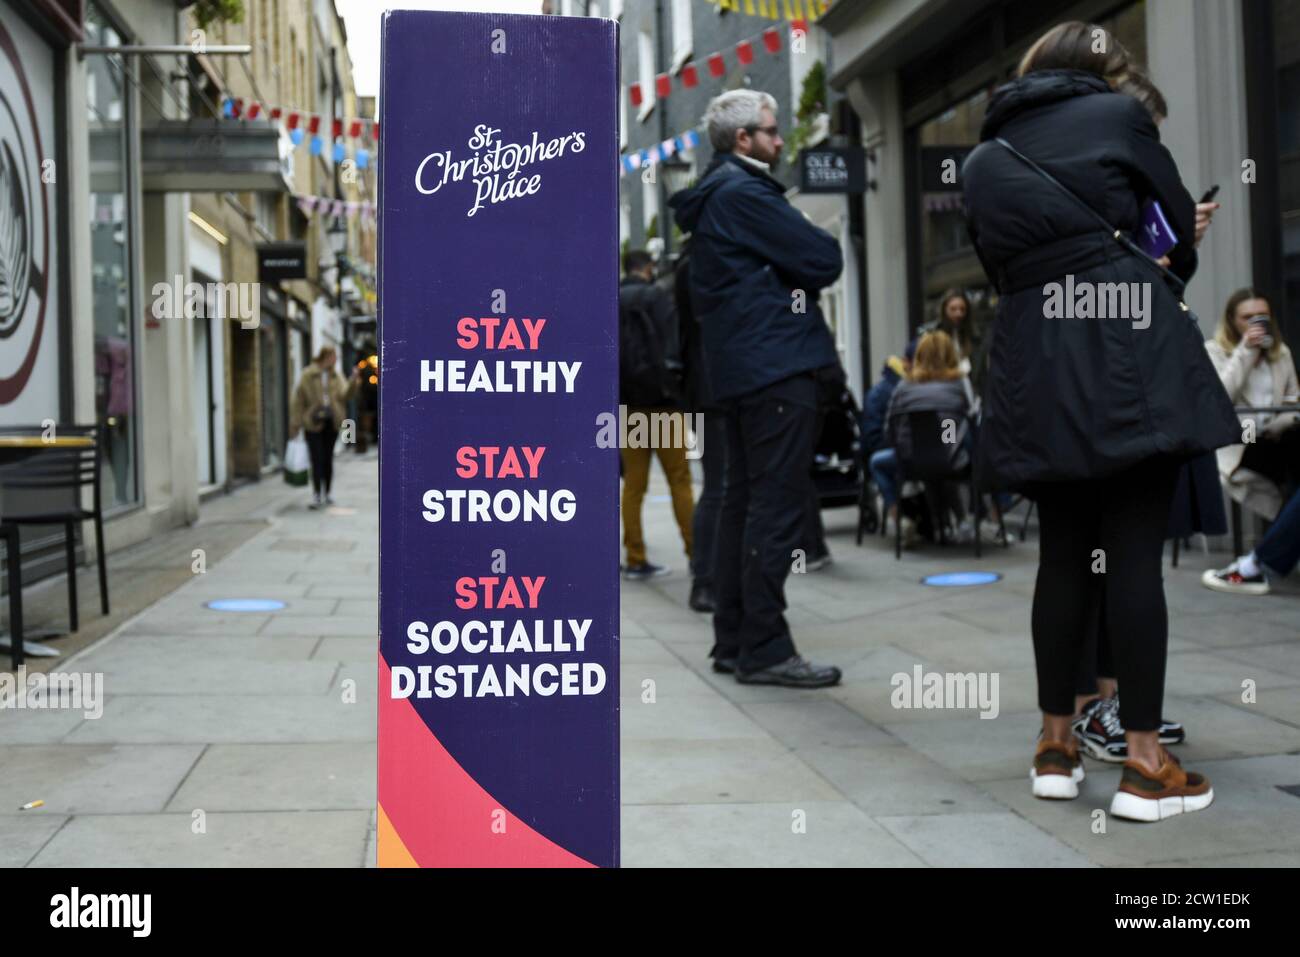 London, UK.  26 September 2020. A social distancing sign in the West End of the capital.  As the number of coronavirus cases continues to rise heralding a second wave of the pandemic, it is reported that London may soon face more comprehensive lockdown restrictions. Credit: Stephen Chung / Alamy Live News Stock Photo